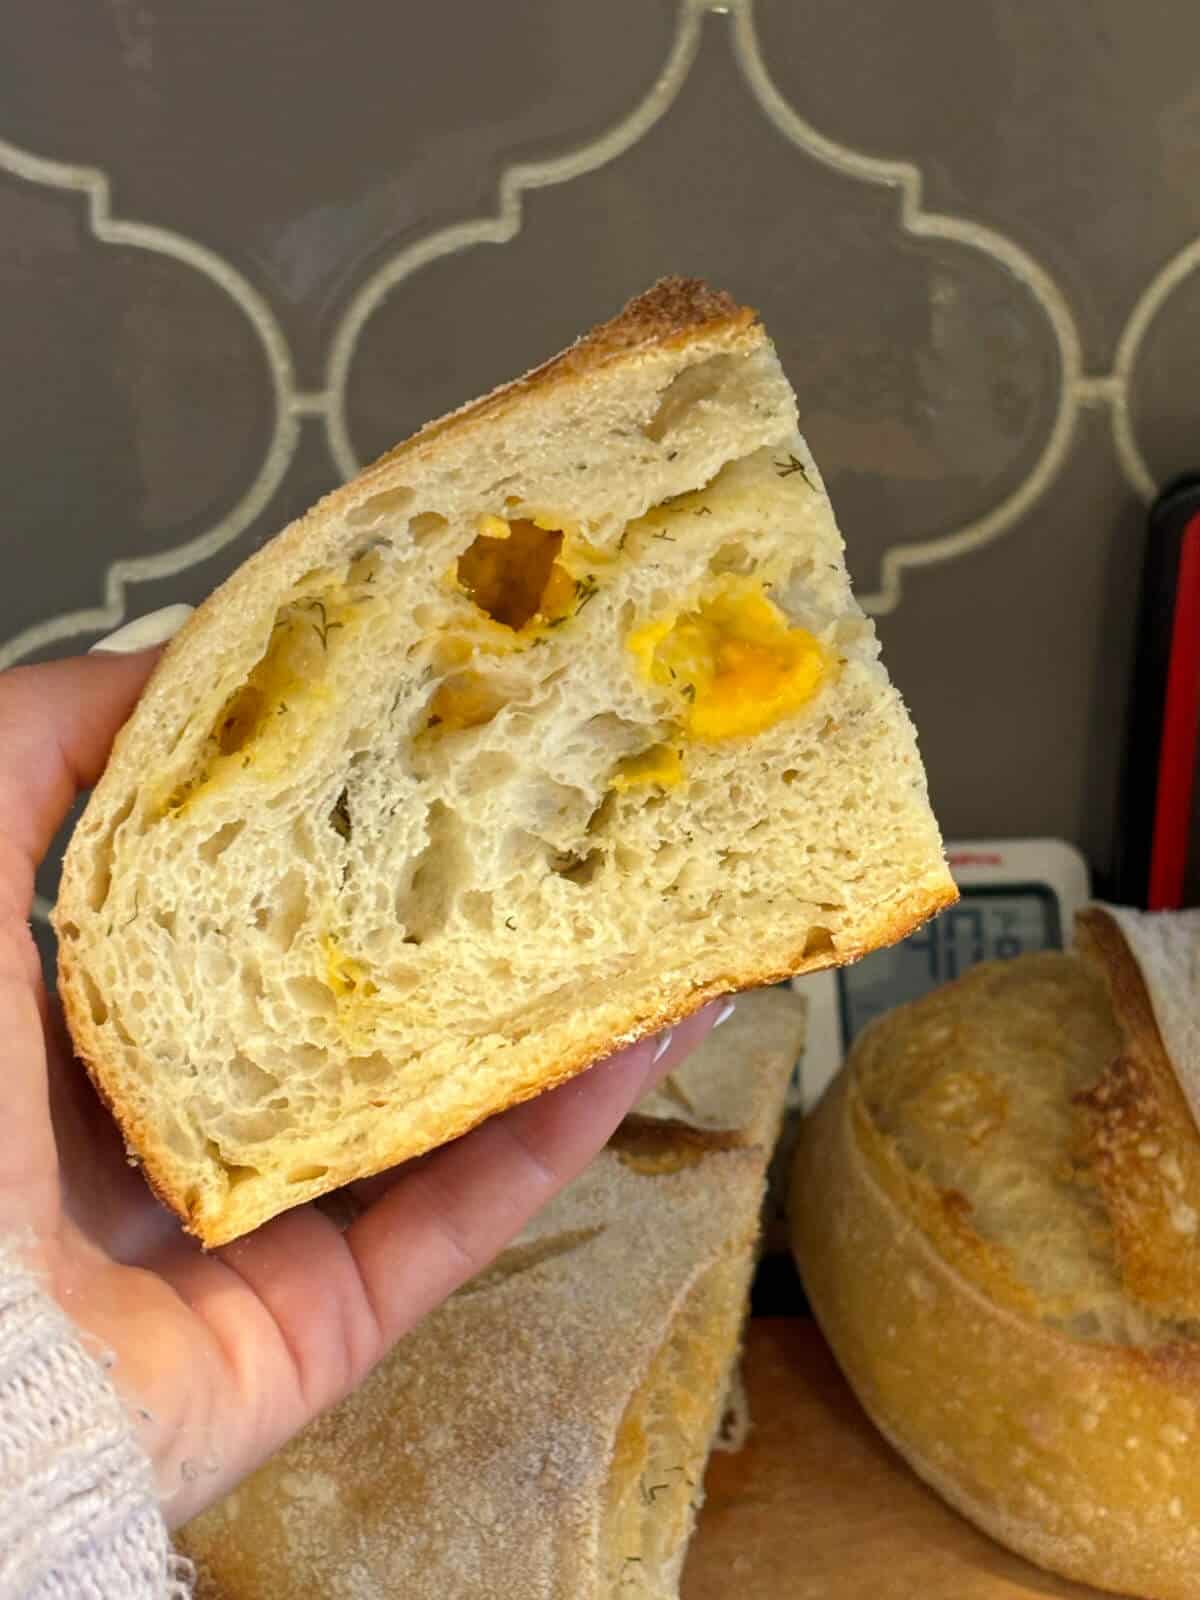 hand holding a hunk of cheddar dill sourdough bread, showing the crumb and melty cheese.